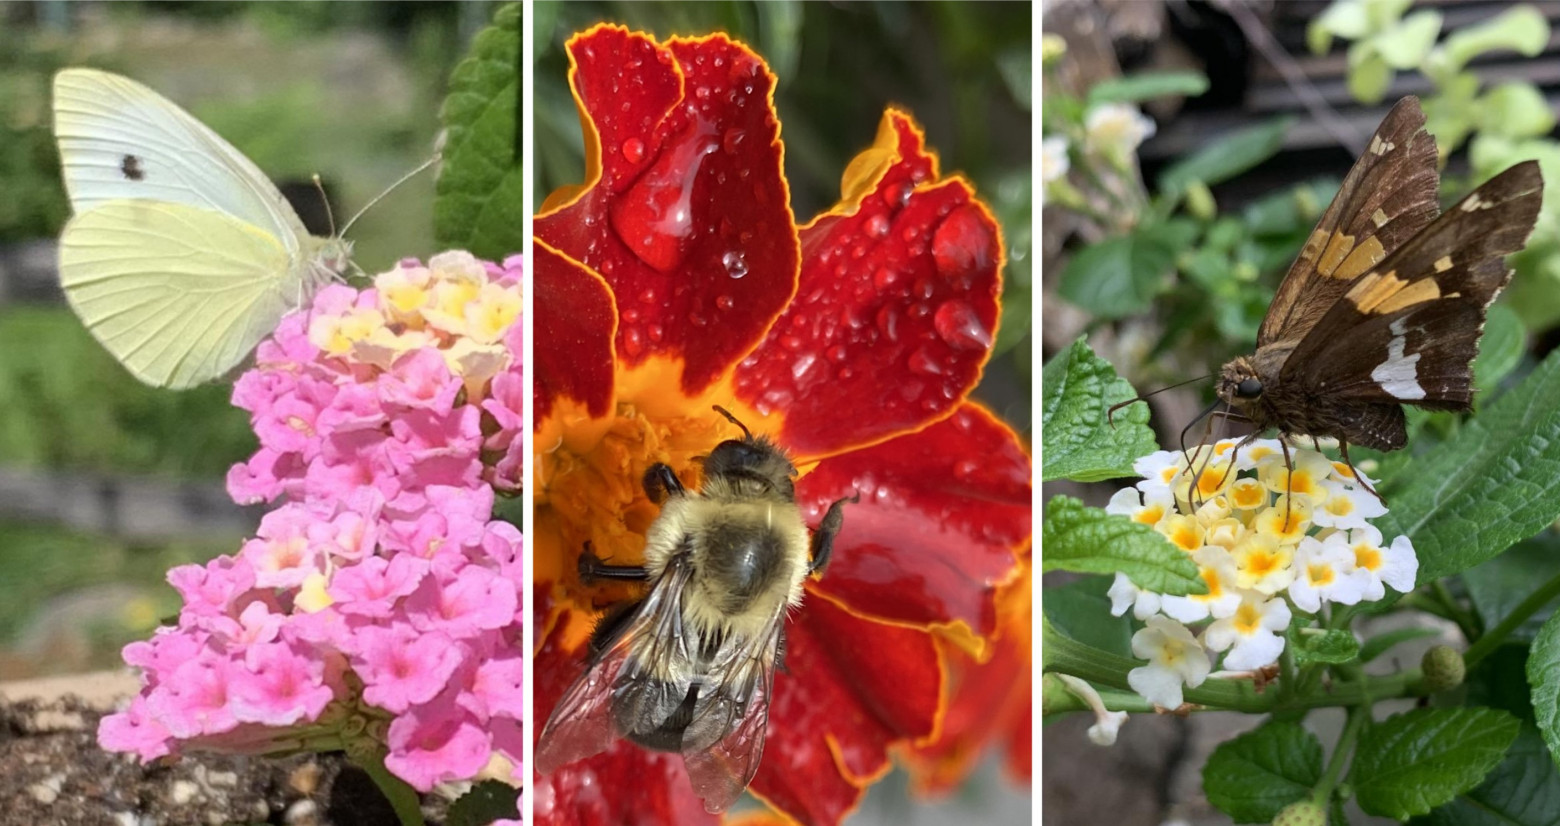 The pictures, one depicting a yellow butterfly perched on pink flowers, a bee perched on a red flower, and a brown butterfly on white flowers. 